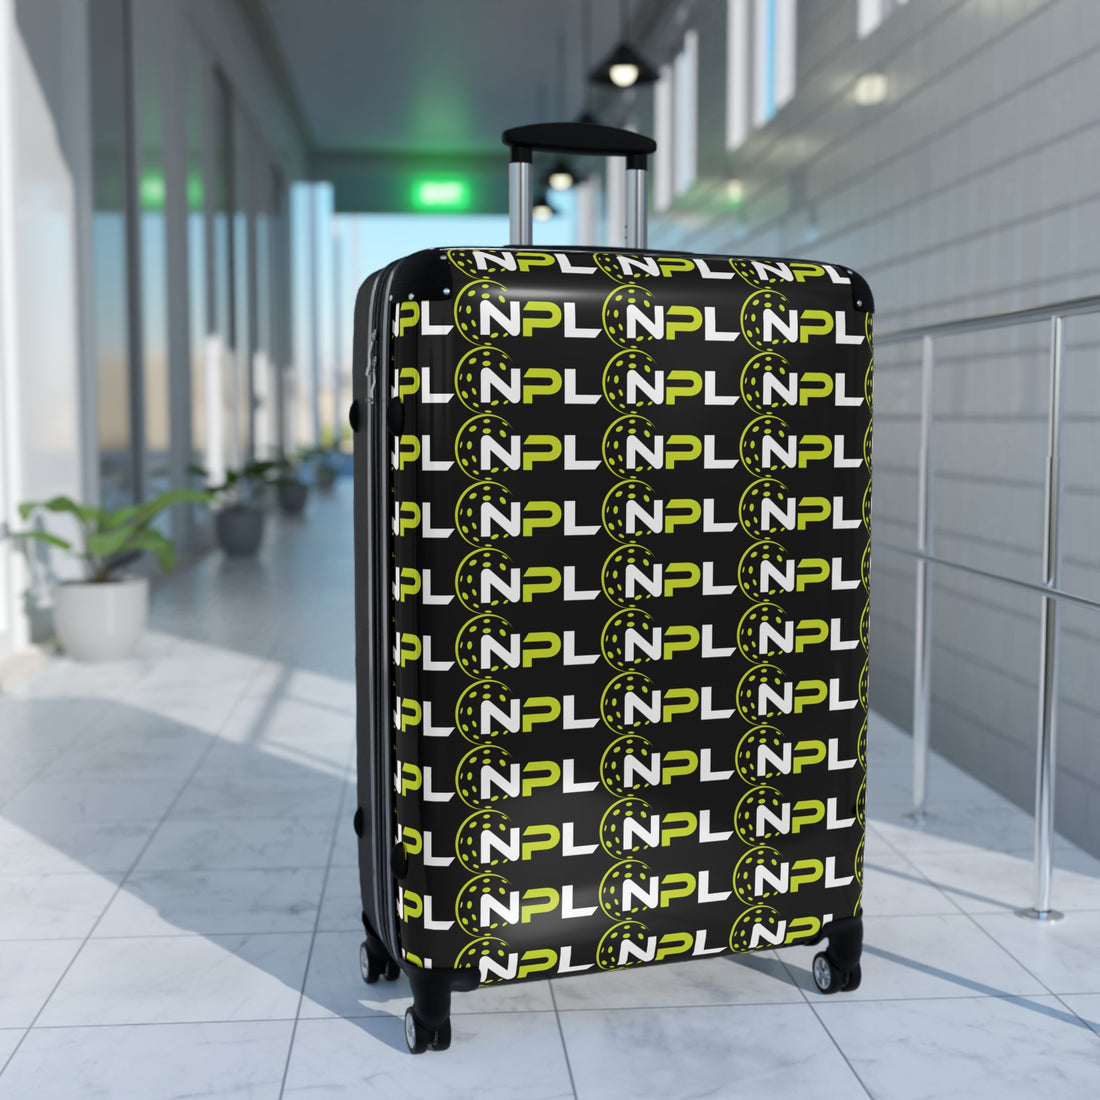 "NPL™ Suitcase: Travel in Style with Pickleball Pride!"